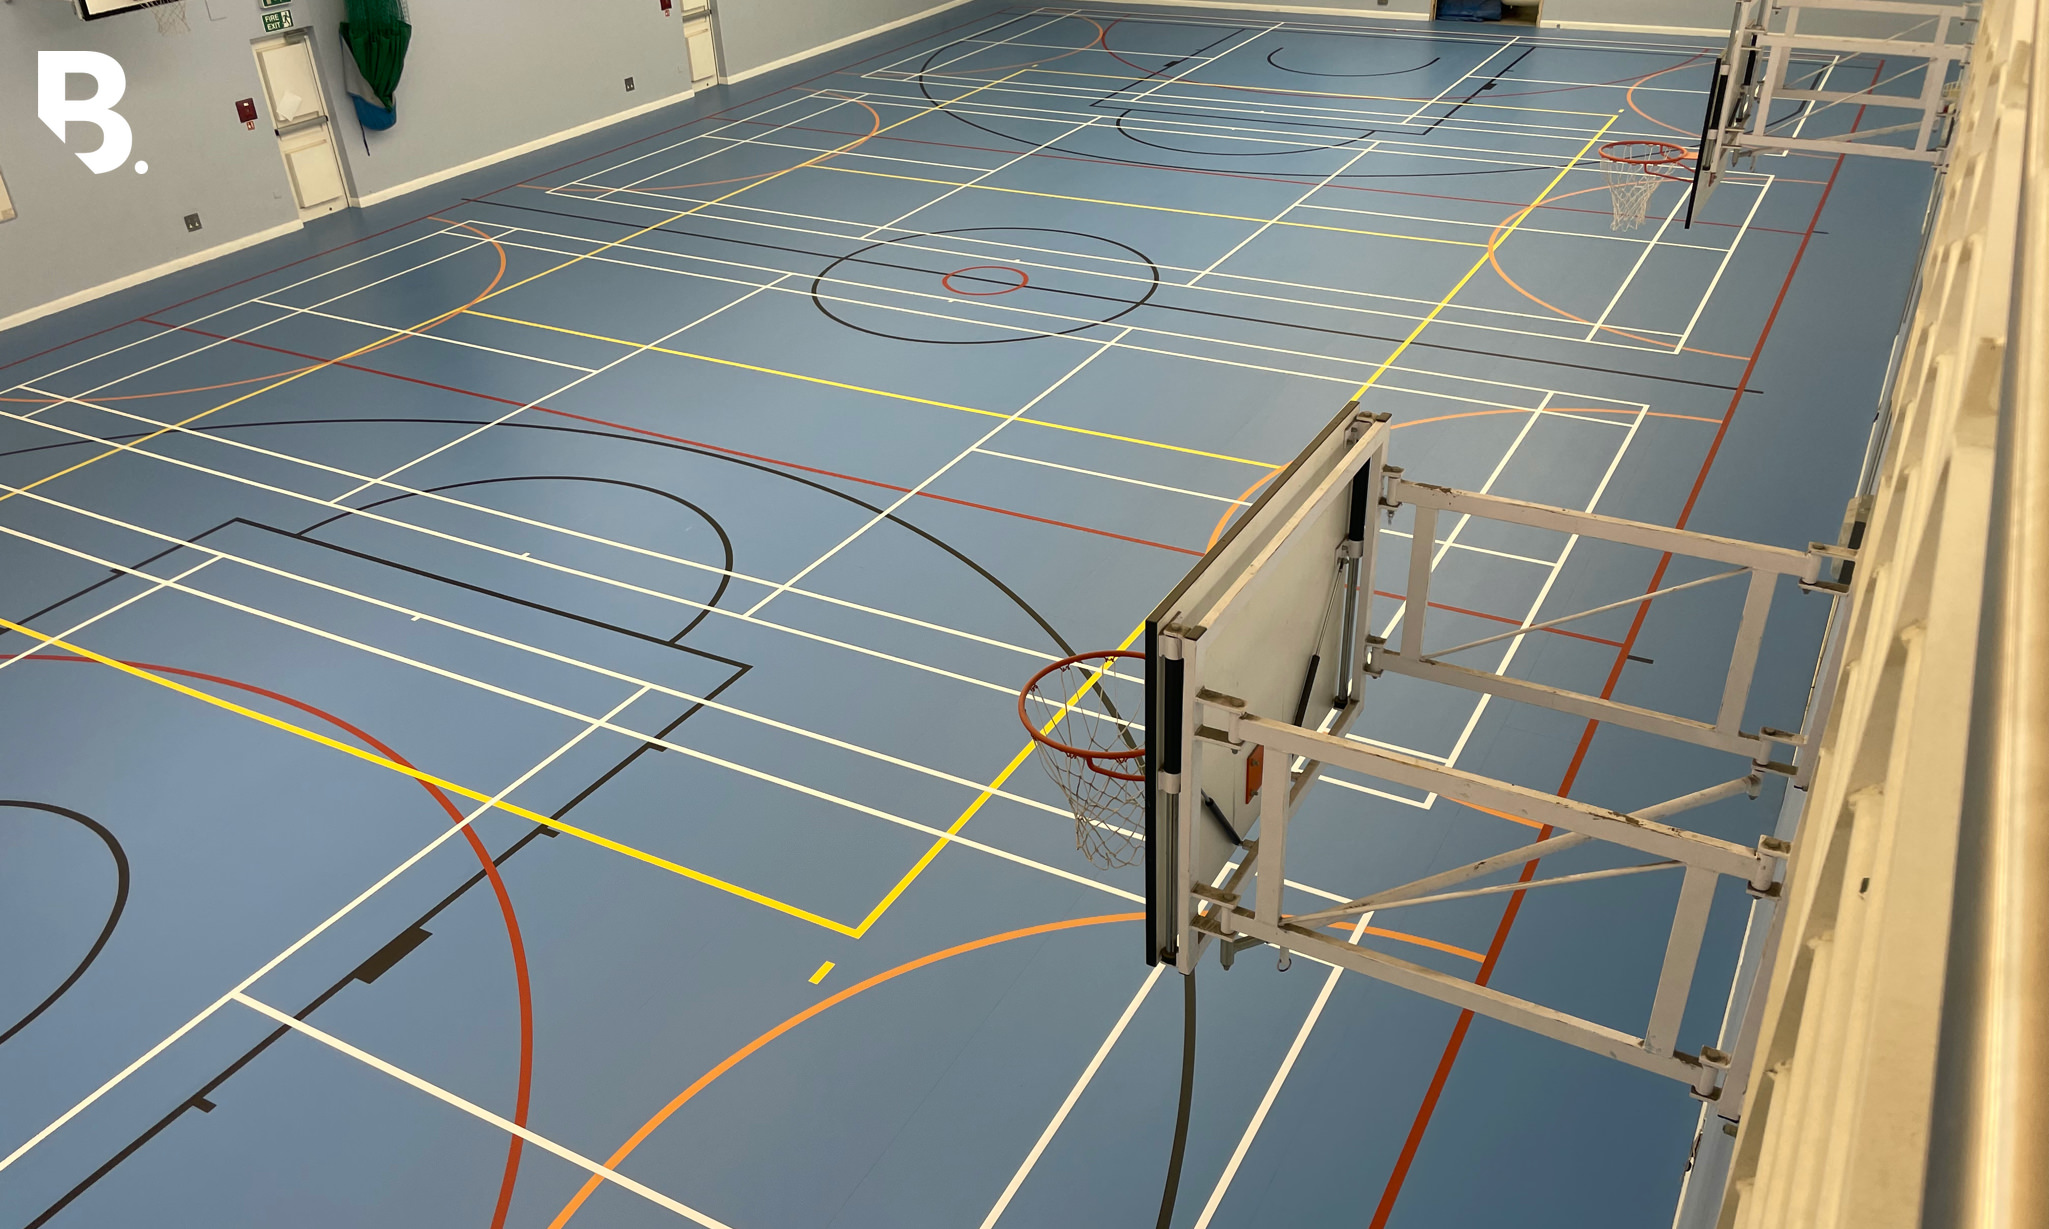 Rock Docks Academy replace their rubber sports floor